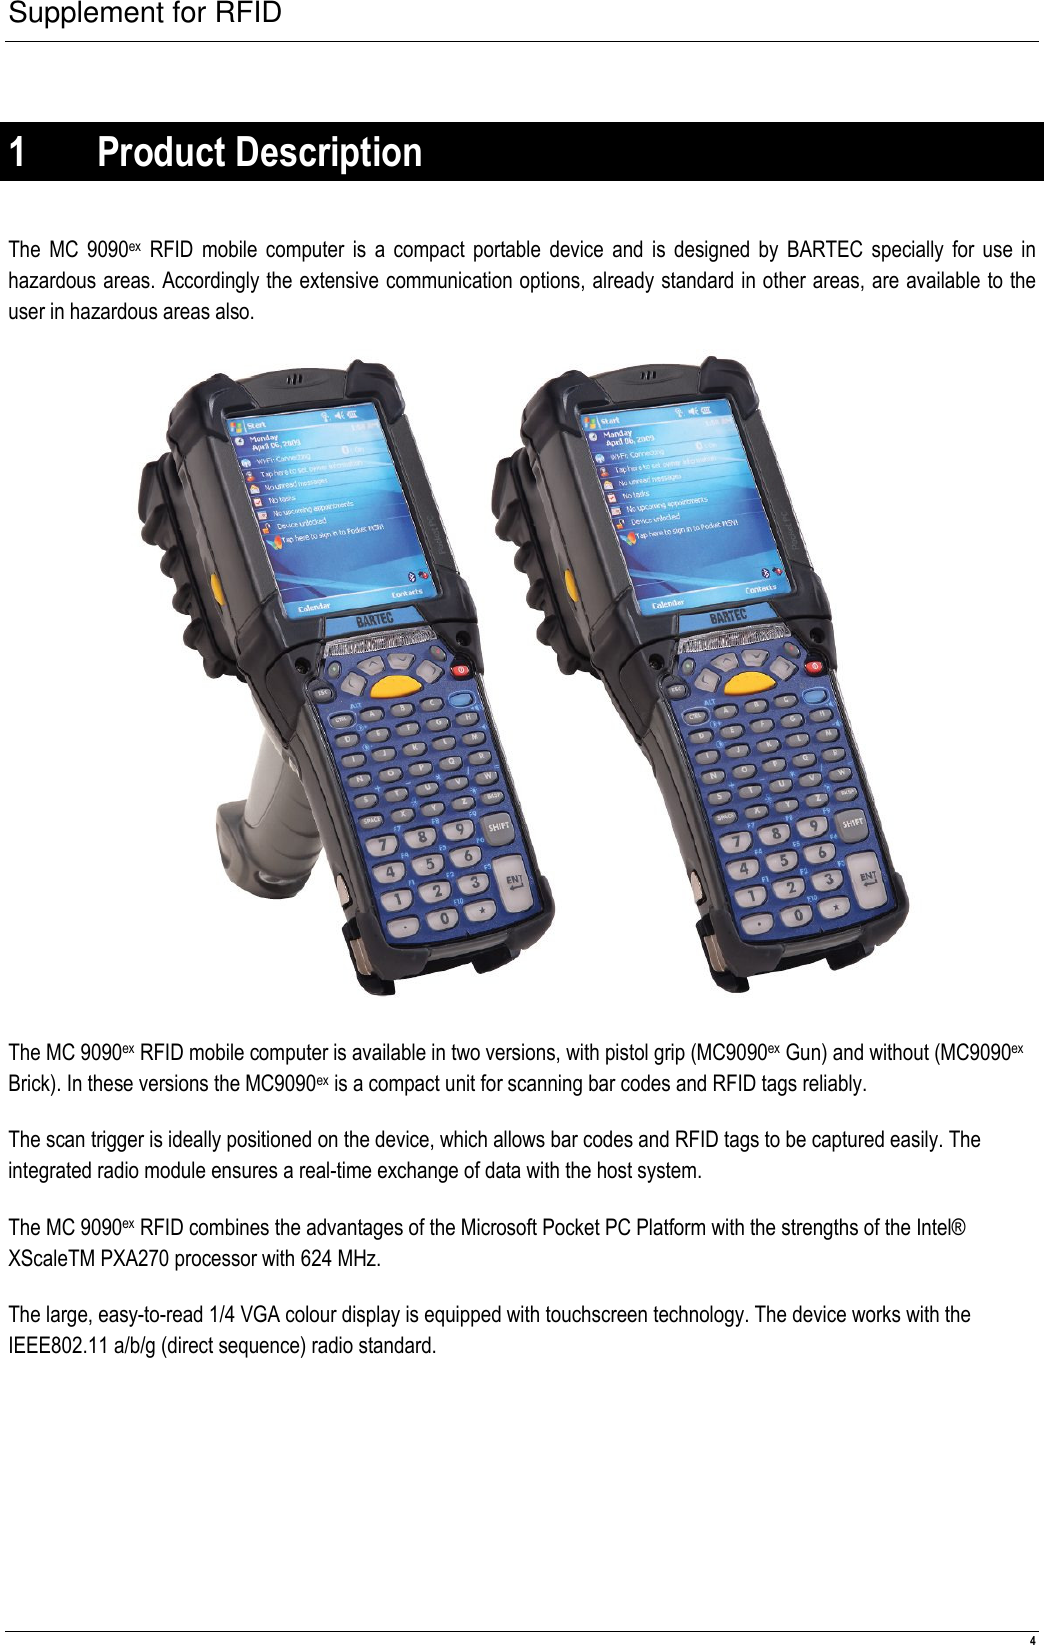 Supplement for RFID  4  1 Product Description  The MC  9090ex  RFID mobile computer is a compact portable device  and  is  designed by  BARTEC specially for use in hazardous areas. Accordingly the extensive communication options, already standard in other areas, are available to the user in hazardous areas also.   The MC 9090ex RFID mobile computer is available in two versions, with pistol grip (MC9090ex Gun) and without (MC9090ex Brick). In these versions the MC9090ex is a compact unit for scanning bar codes and RFID tags reliably. The scan trigger is ideally positioned on the device, which allows bar codes and RFID tags to be captured easily. The integrated radio module ensures a real-time exchange of data with the host system. The MC 9090ex RFID combines the advantages of the Microsoft Pocket PC Platform with the strengths of the Intel® XScaleTM PXA270 processor with 624 MHz. The large, easy-to-read 1/4 VGA colour display is equipped with touchscreen technology. The device works with the IEEE802.11 a/b/g (direct sequence) radio standard. 